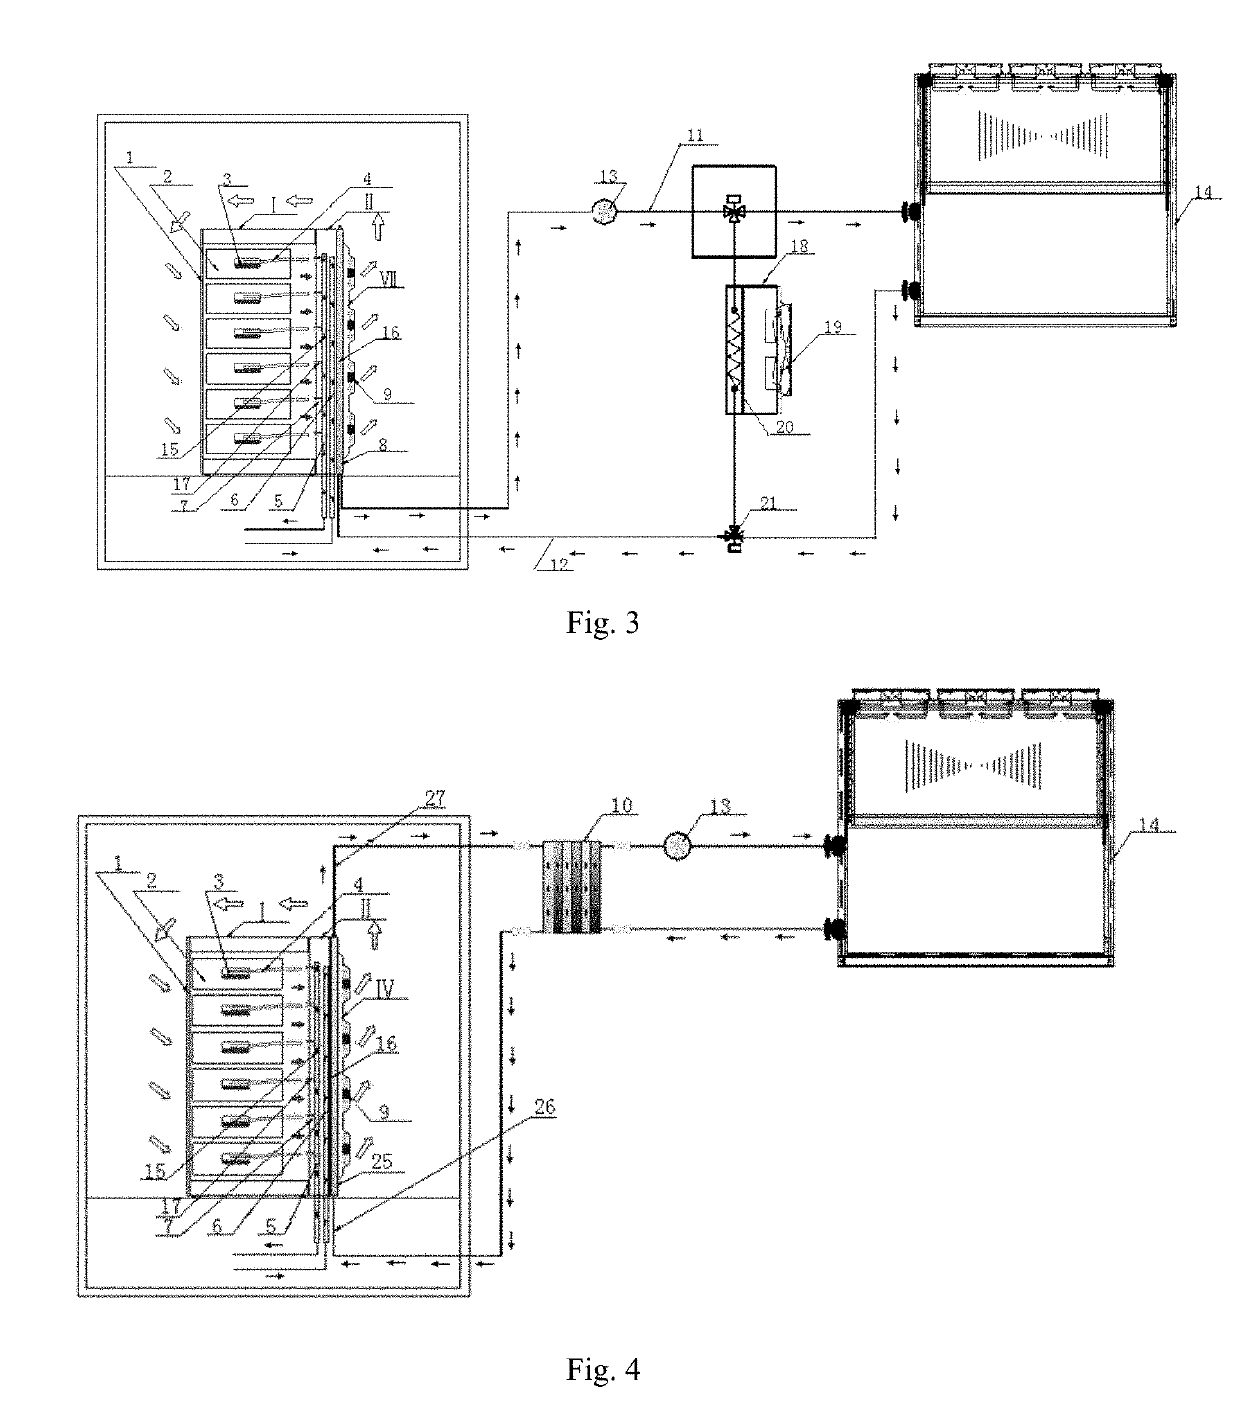 Server rack heat sink system with combination of liquid cooling device and auxiliary heat sink device